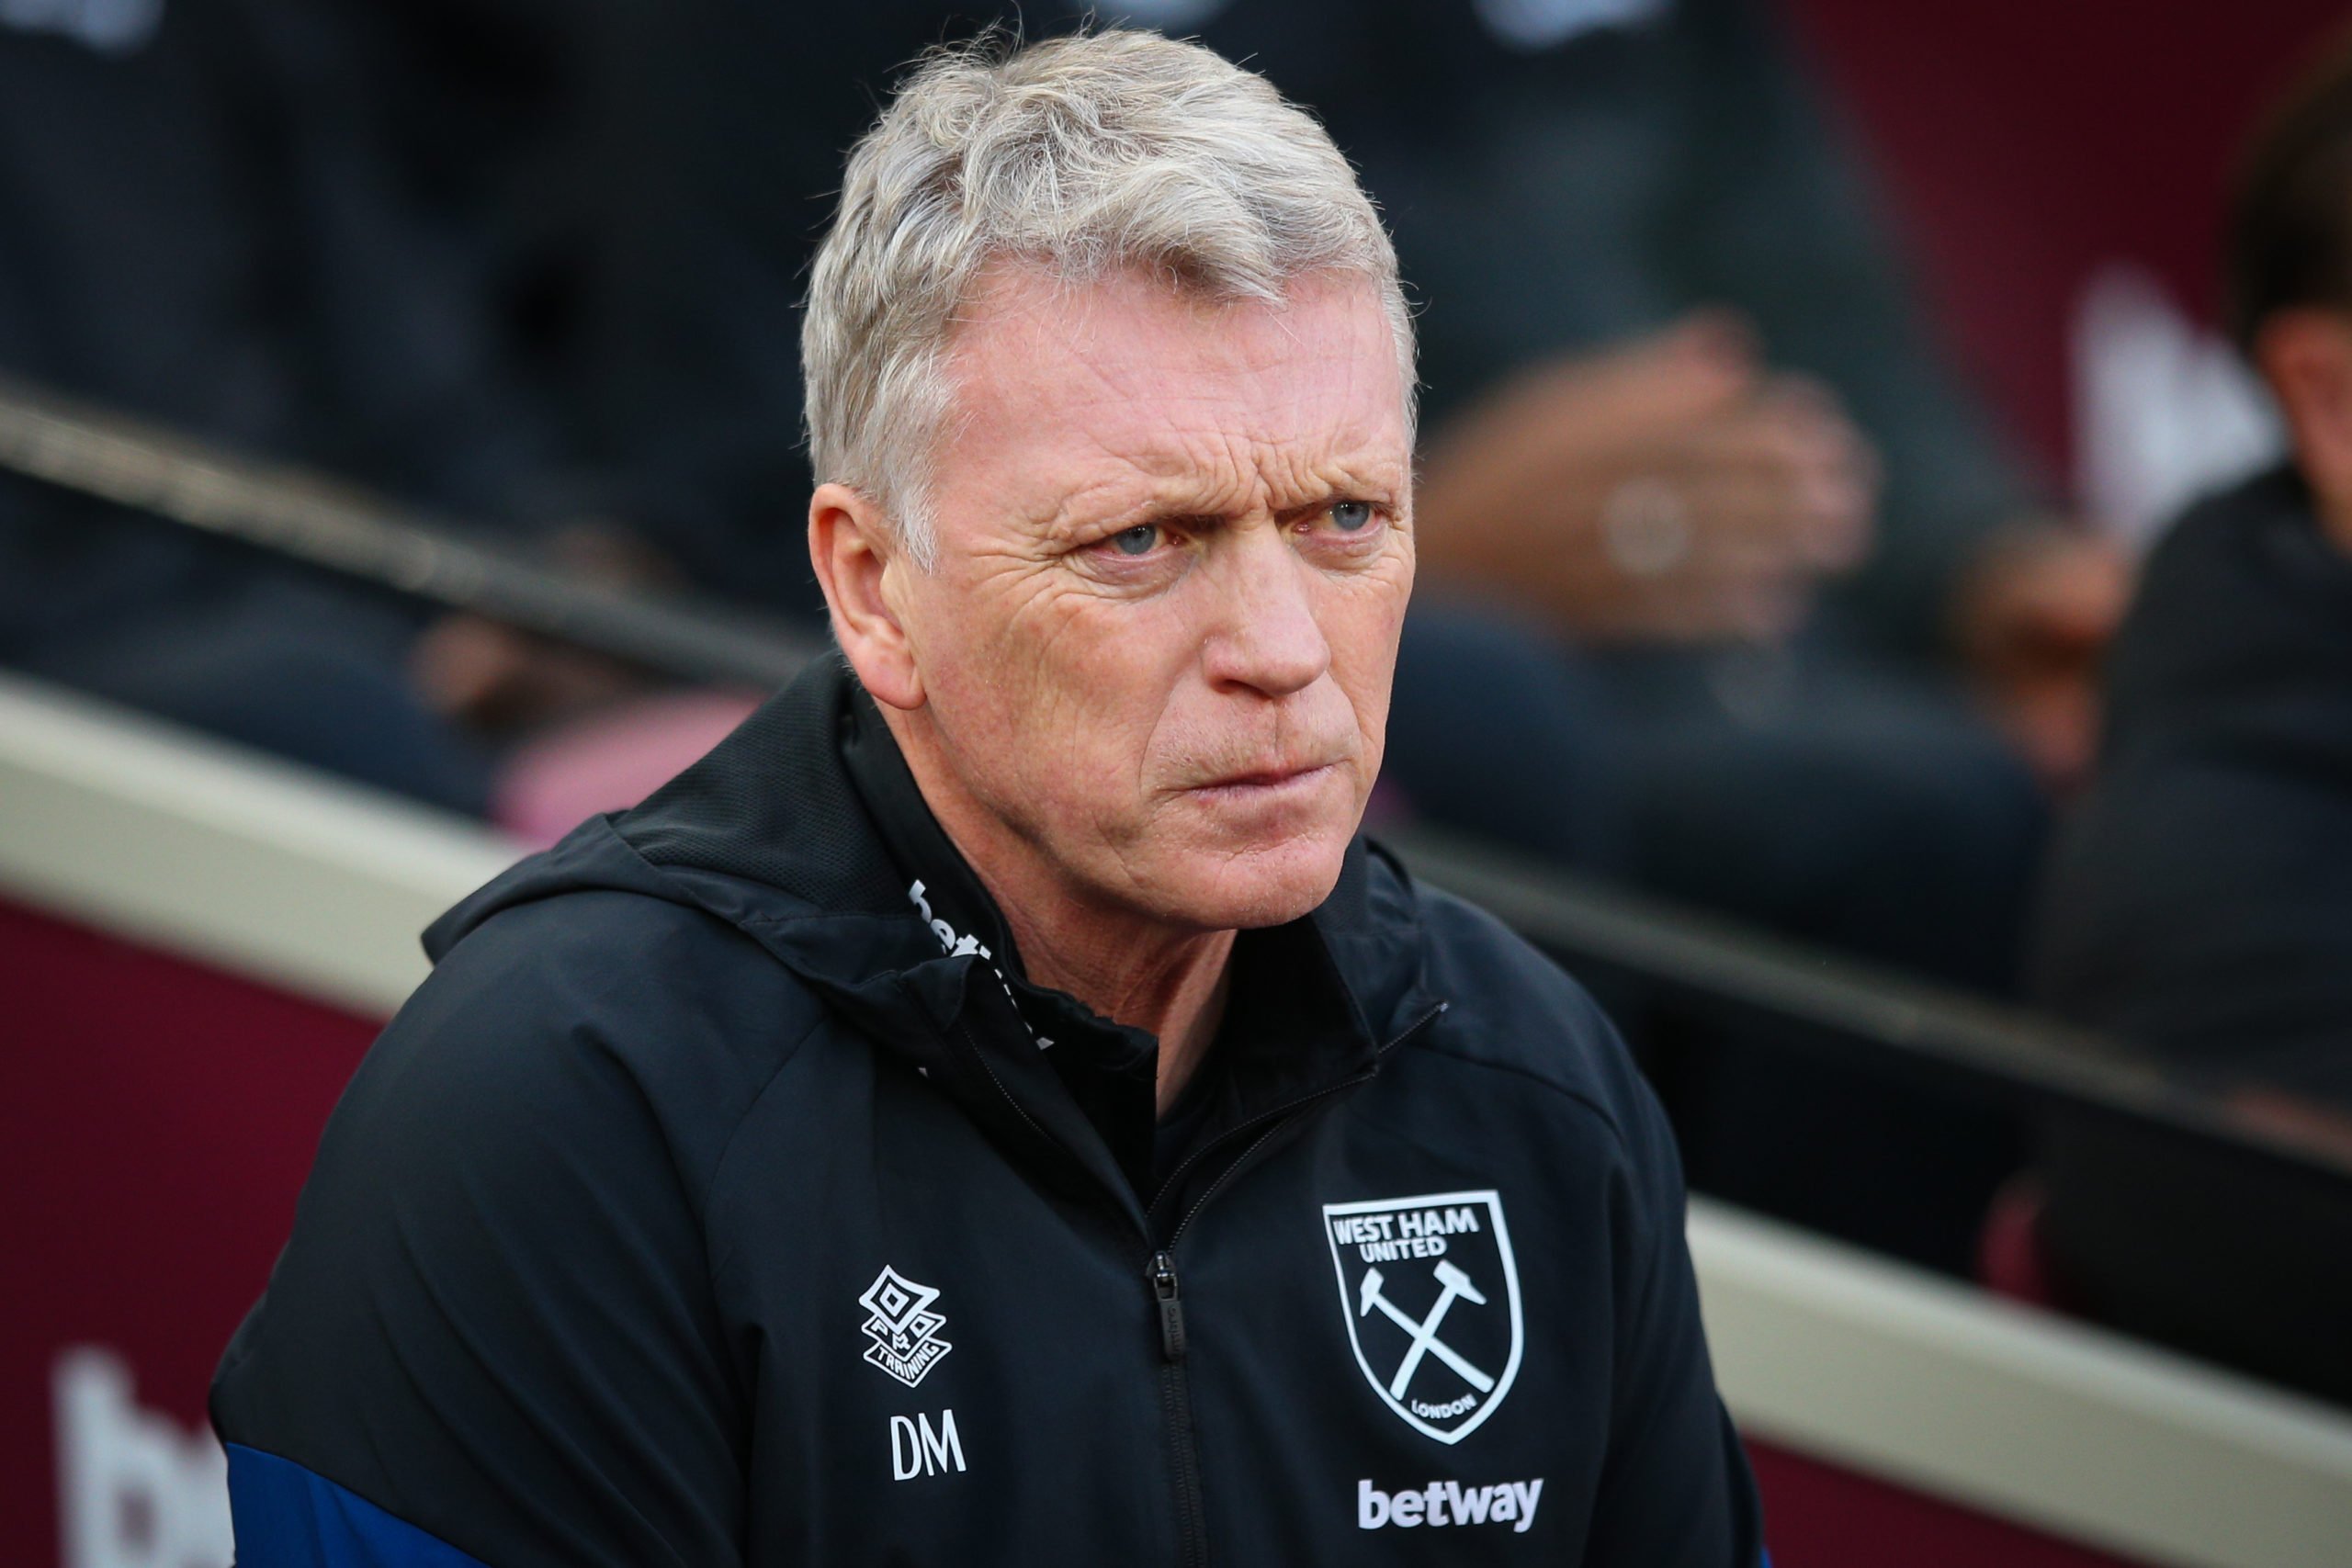 Dean Ashton absolutely tears into West Ham over poor transfer window and says club has wasted golden opportunity